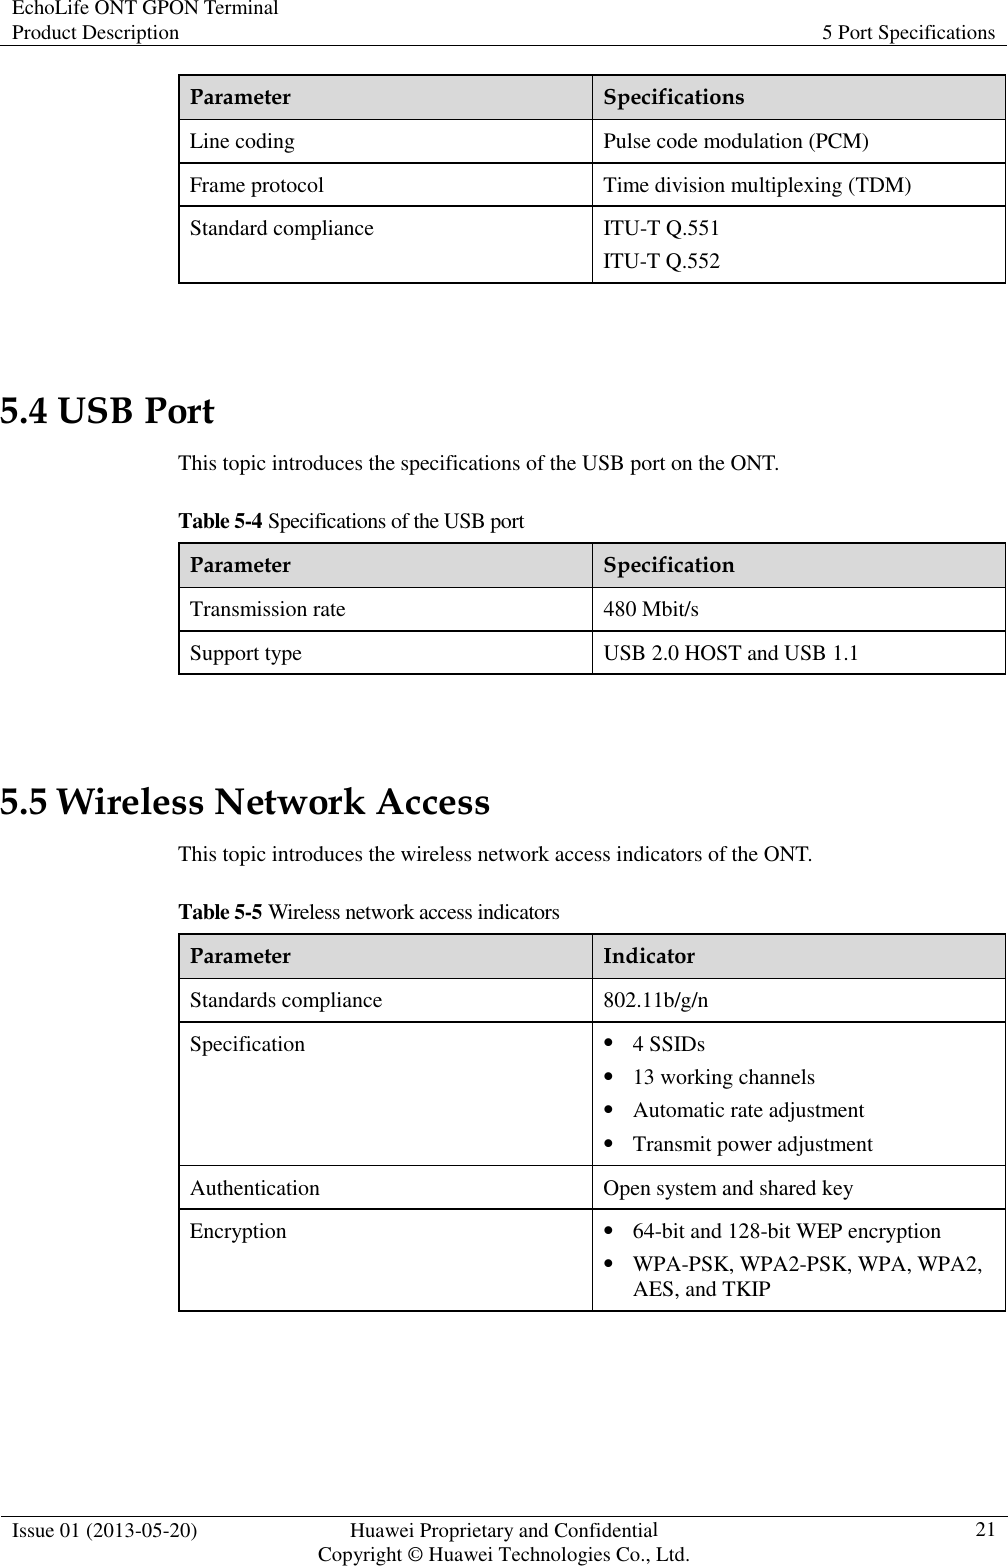 EchoLife ONT GPON Terminal Product Description  5 Port Specifications  Issue 01 (2013-05-20)  Huawei Proprietary and Confidential                   Copyright © Huawei Technologies Co., Ltd. 21  Parameter  Specifications Line coding  Pulse code modulation (PCM) Frame protocol  Time division multiplexing (TDM) Standard compliance  ITU-T Q.551 ITU-T Q.552  5.4 USB Port This topic introduces the specifications of the USB port on the ONT. Table 5-4 Specifications of the USB port Parameter  Specification Transmission rate  480 Mbit/s Support type  USB 2.0 HOST and USB 1.1  5.5 Wireless Network Access This topic introduces the wireless network access indicators of the ONT. Table 5-5 Wireless network access indicators Parameter  Indicator Standards compliance  802.11b/g/n Specification  4 SSIDs  13 working channels  Automatic rate adjustment  Transmit power adjustment Authentication  Open system and shared key   Encryption  64-bit and 128-bit WEP encryption  WPA-PSK, WPA2-PSK, WPA, WPA2, AES, and TKIP  